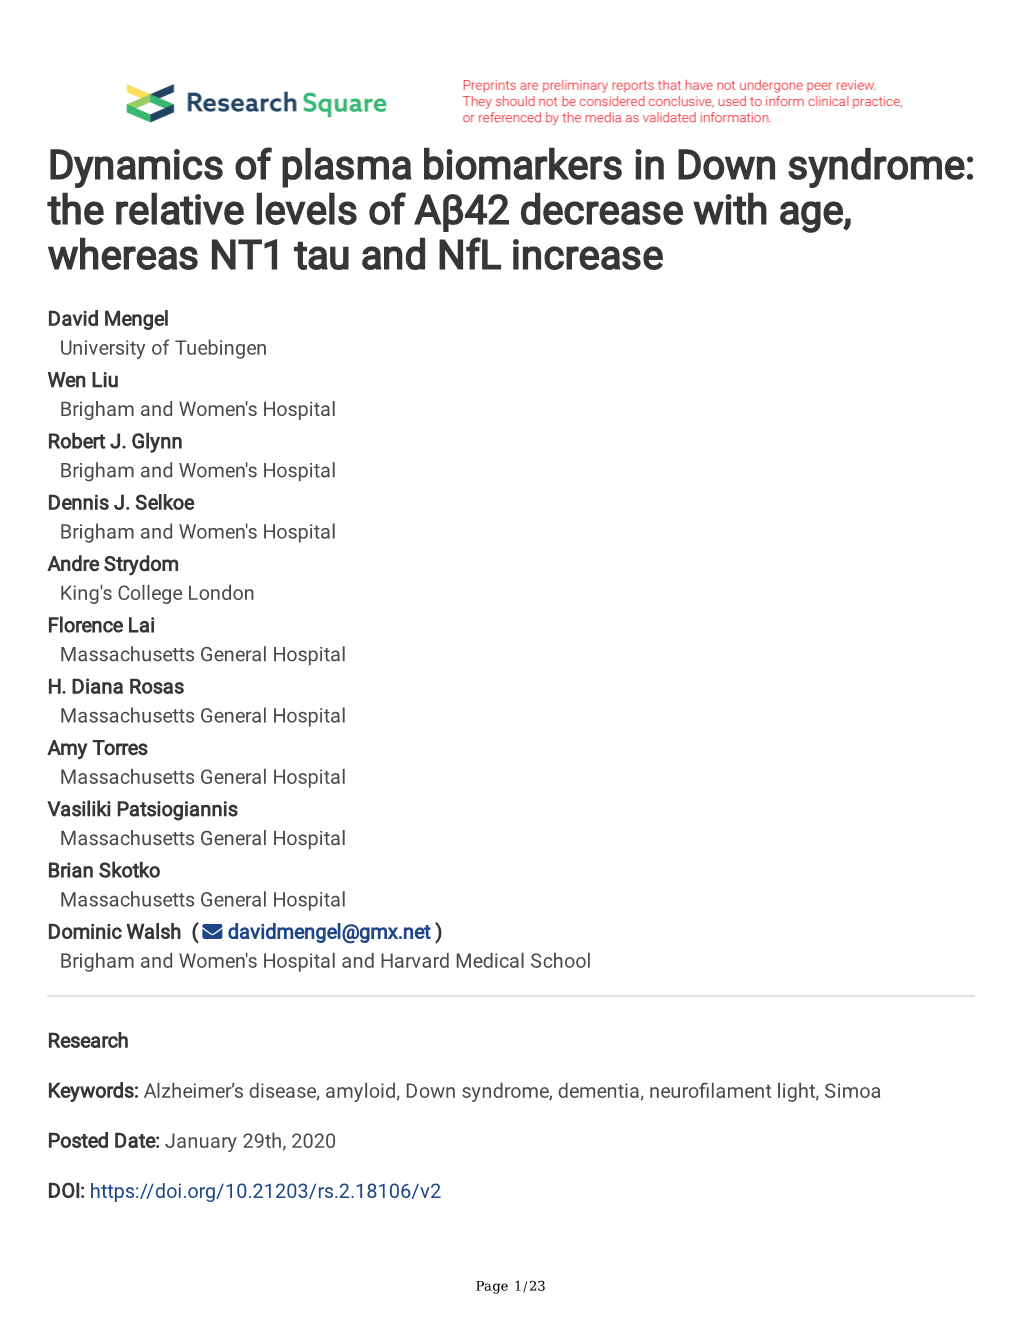 Dynamics of Plasma Biomarkers in Down Syndrome: the Relative Levels of Aβ42 Decrease with Age, Whereas NT1 Tau and Nfl Increase